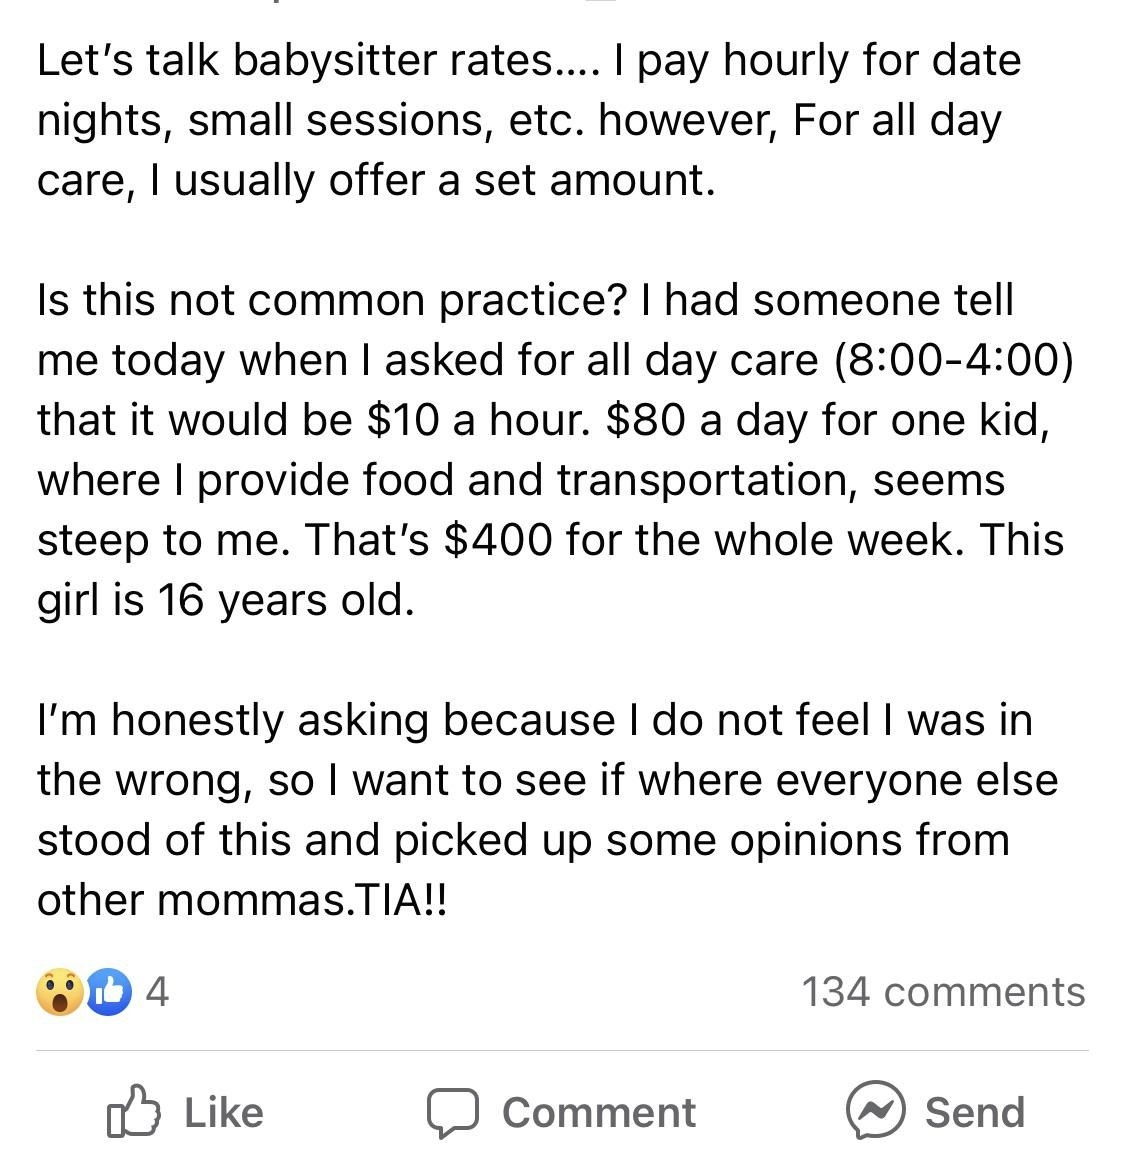 someone confused that someone would want more than $10 per hour for a babysitting gig